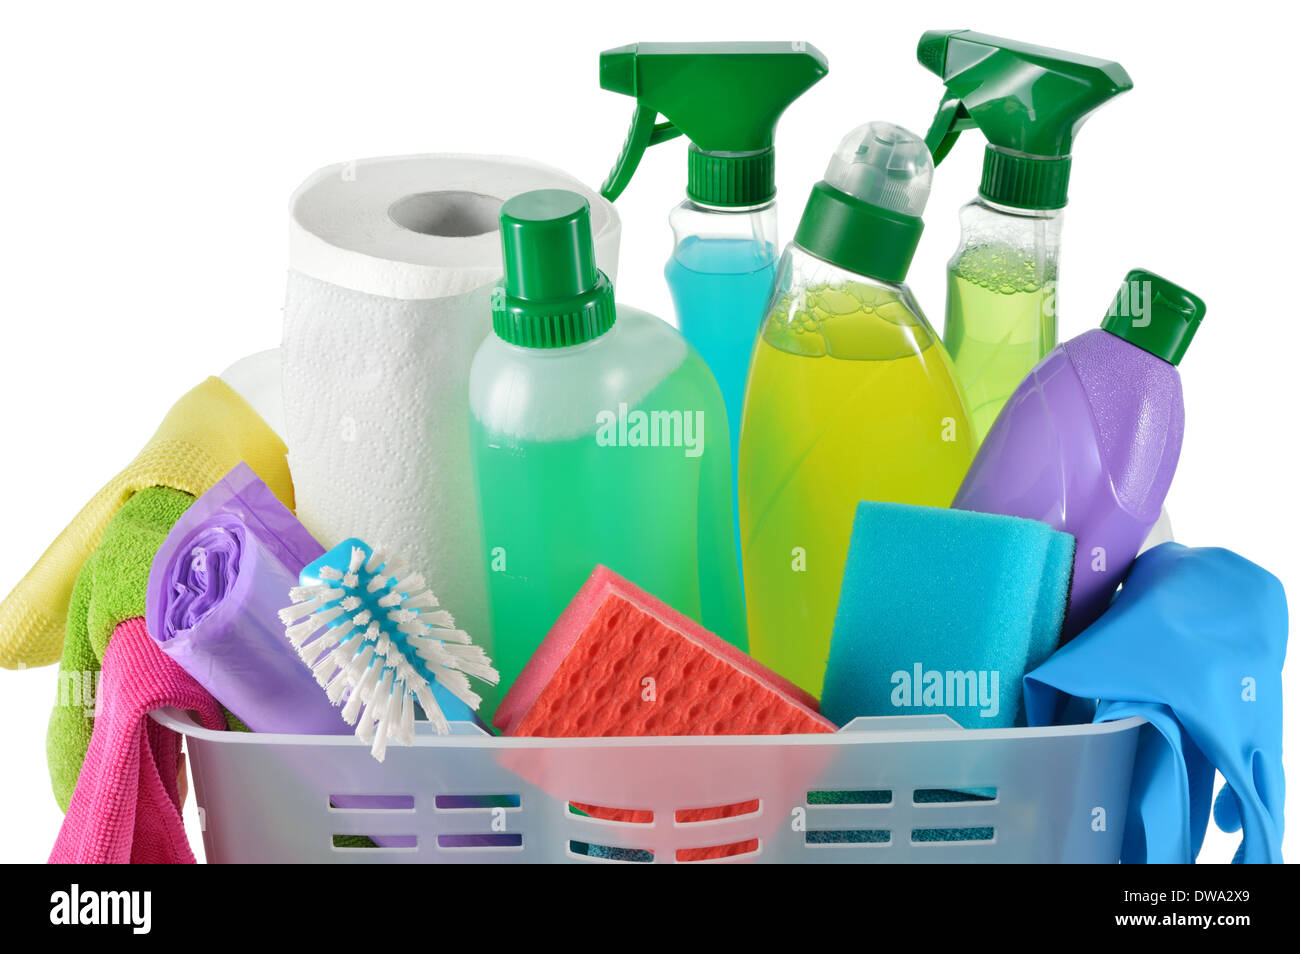 https://c8.alamy.com/comp/DWA2X9/close-up-of-cleaning-products-and-supplies-in-a-basket-cleaners-microfiber-DWA2X9.jpg